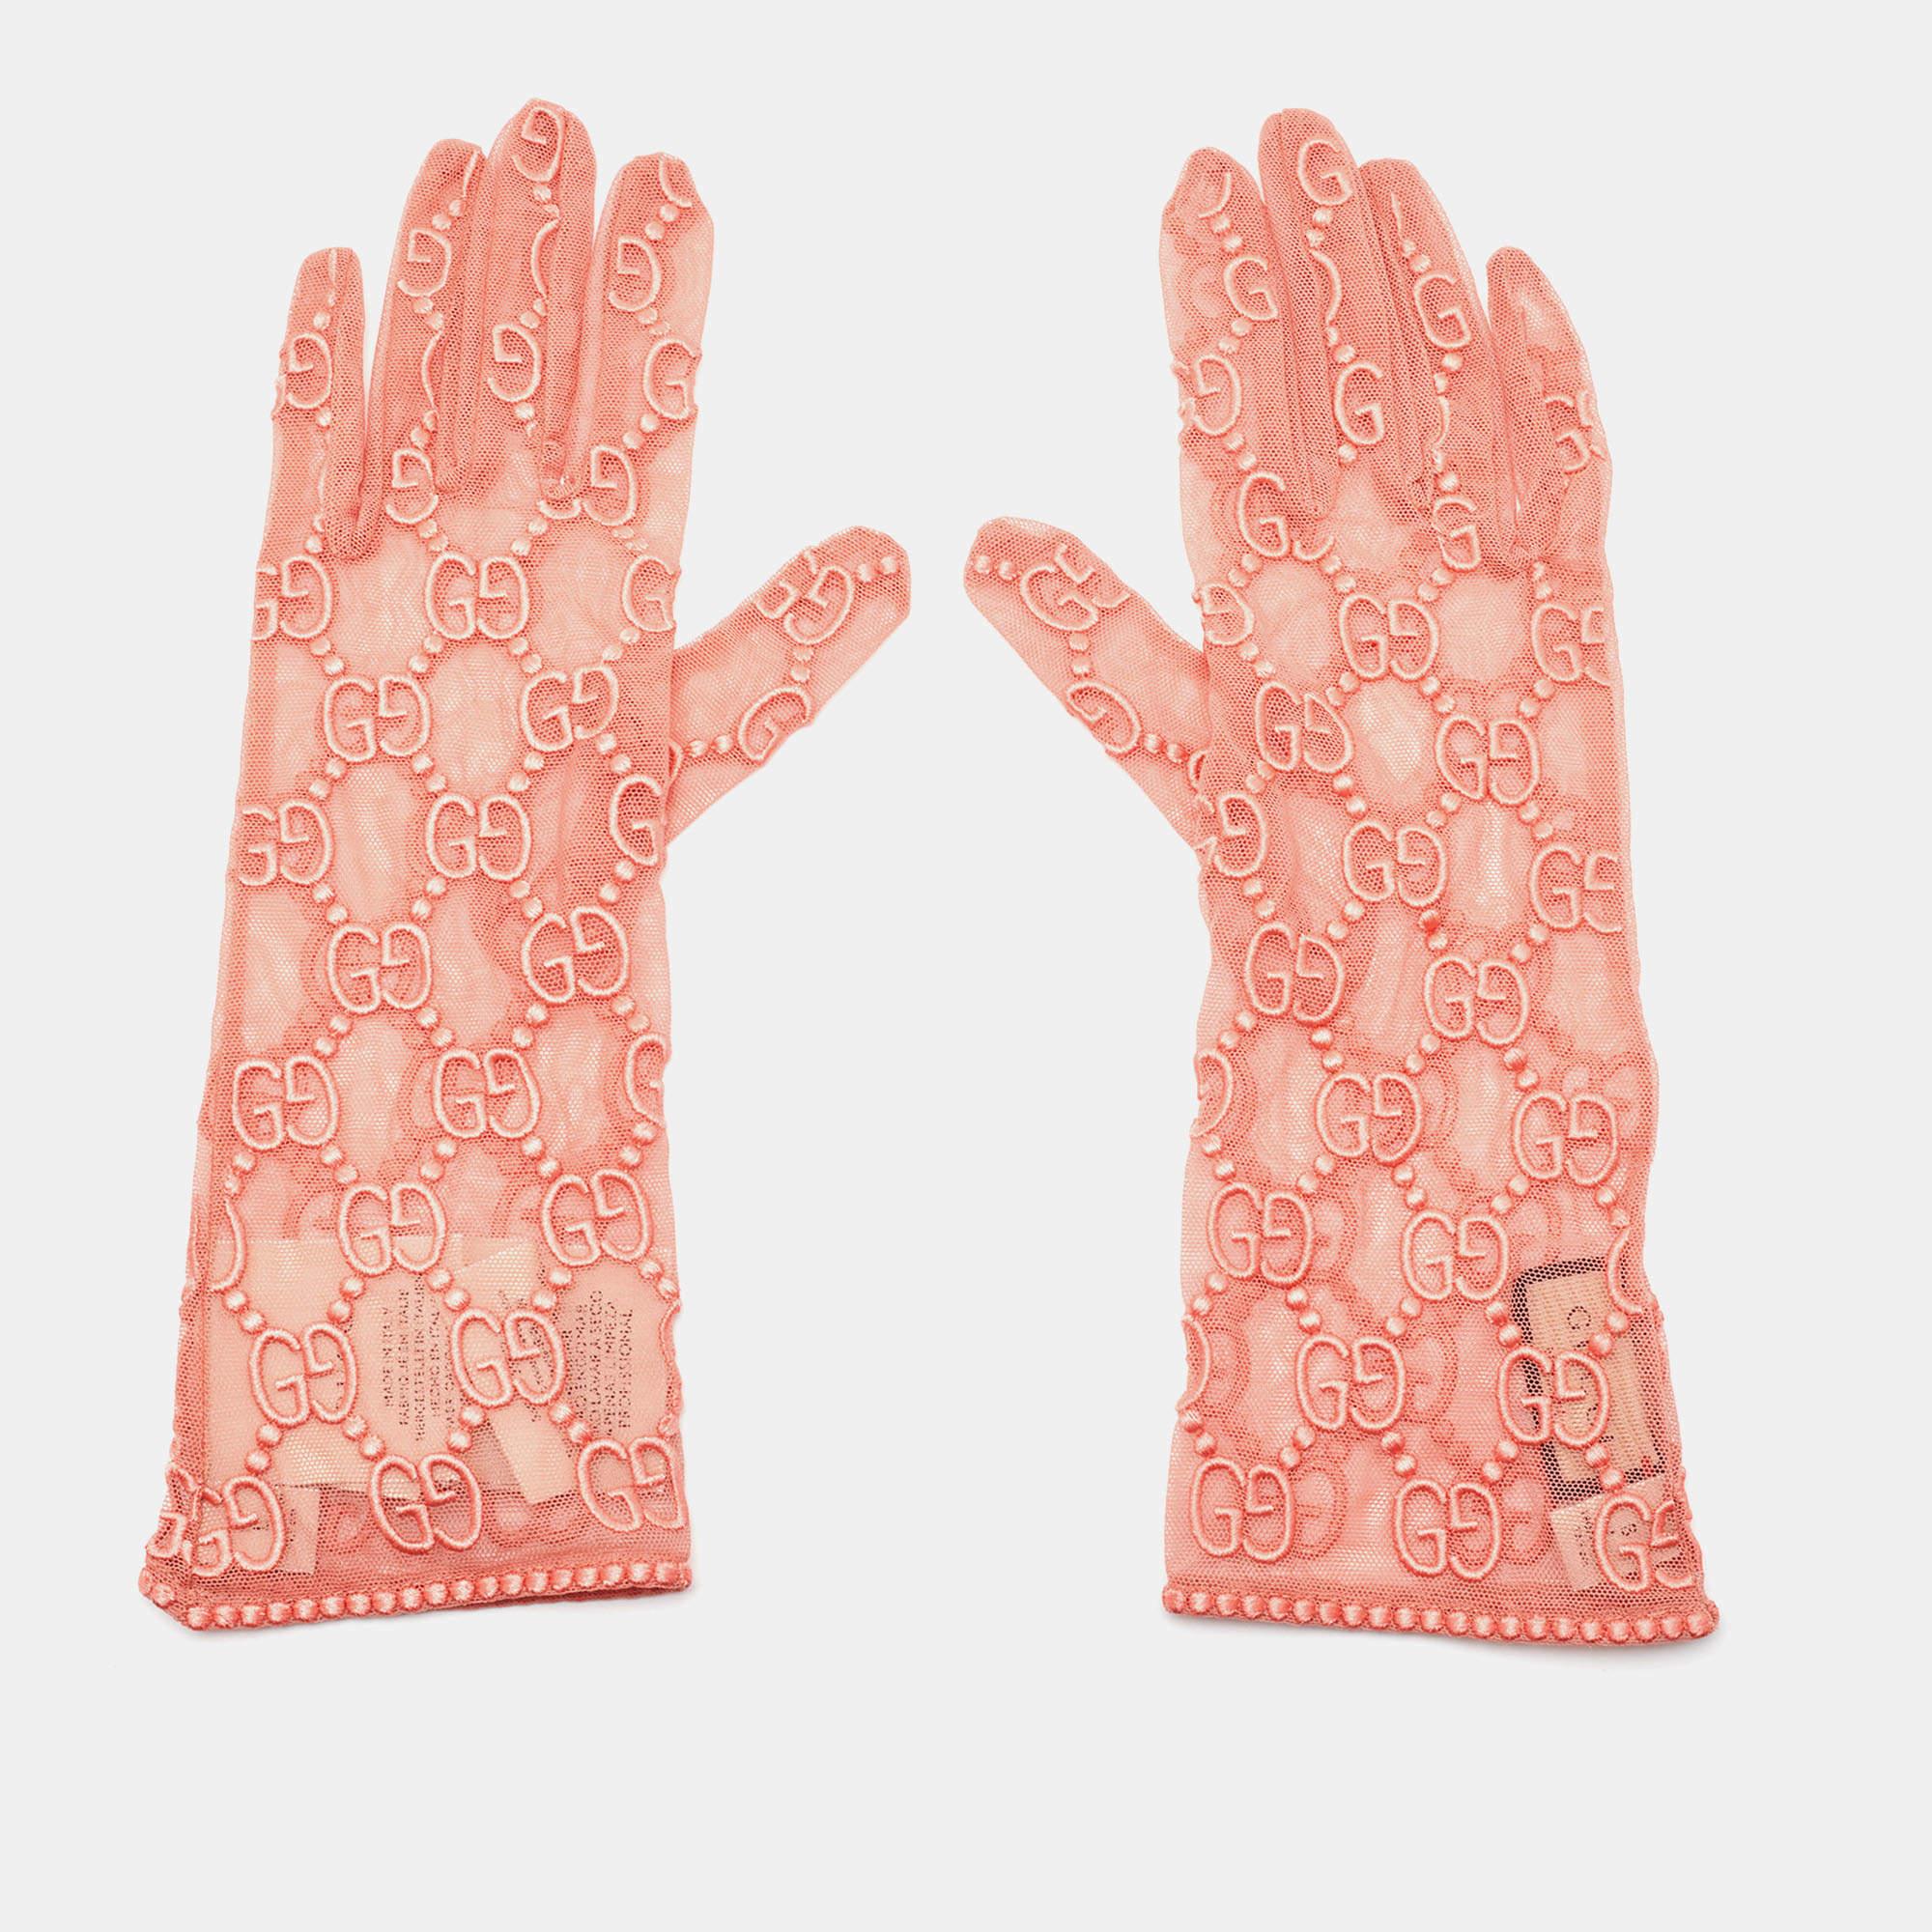 The Gucci gloves are a chic accessory. Crafted from delicate pink tulle, they feature Gucci's iconic logo embroidery, creating a sophisticated and stylish design. These gloves add a touch of elegance to any outfit, making them a perfect choice for